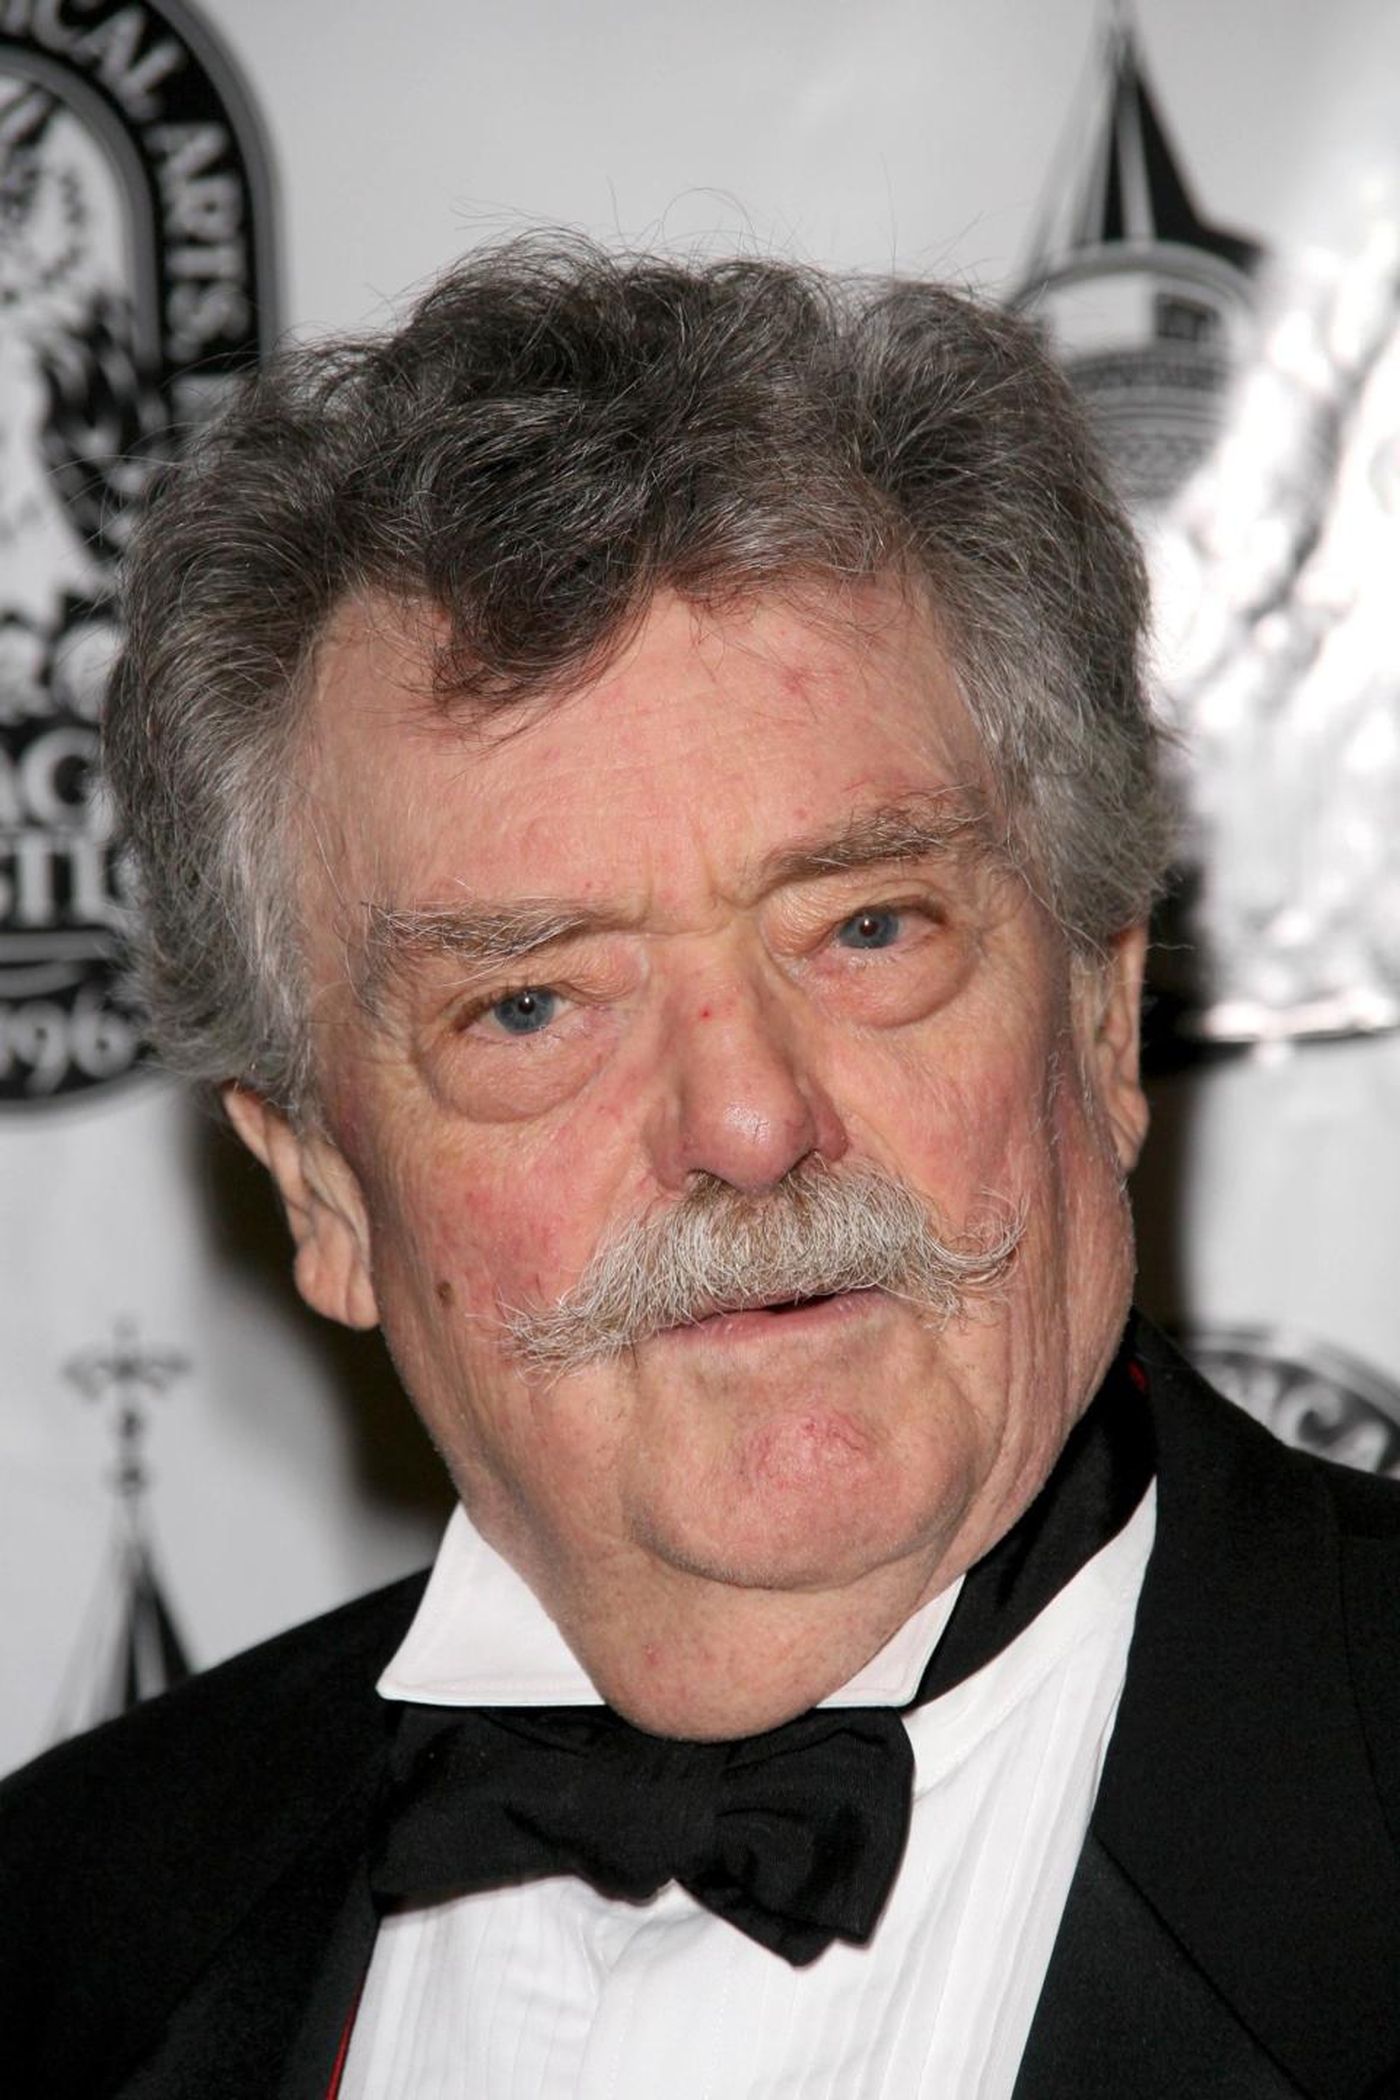 Bewitched' and 'Titanic' actor Bernard Fox dead at 89 - NY Daily News